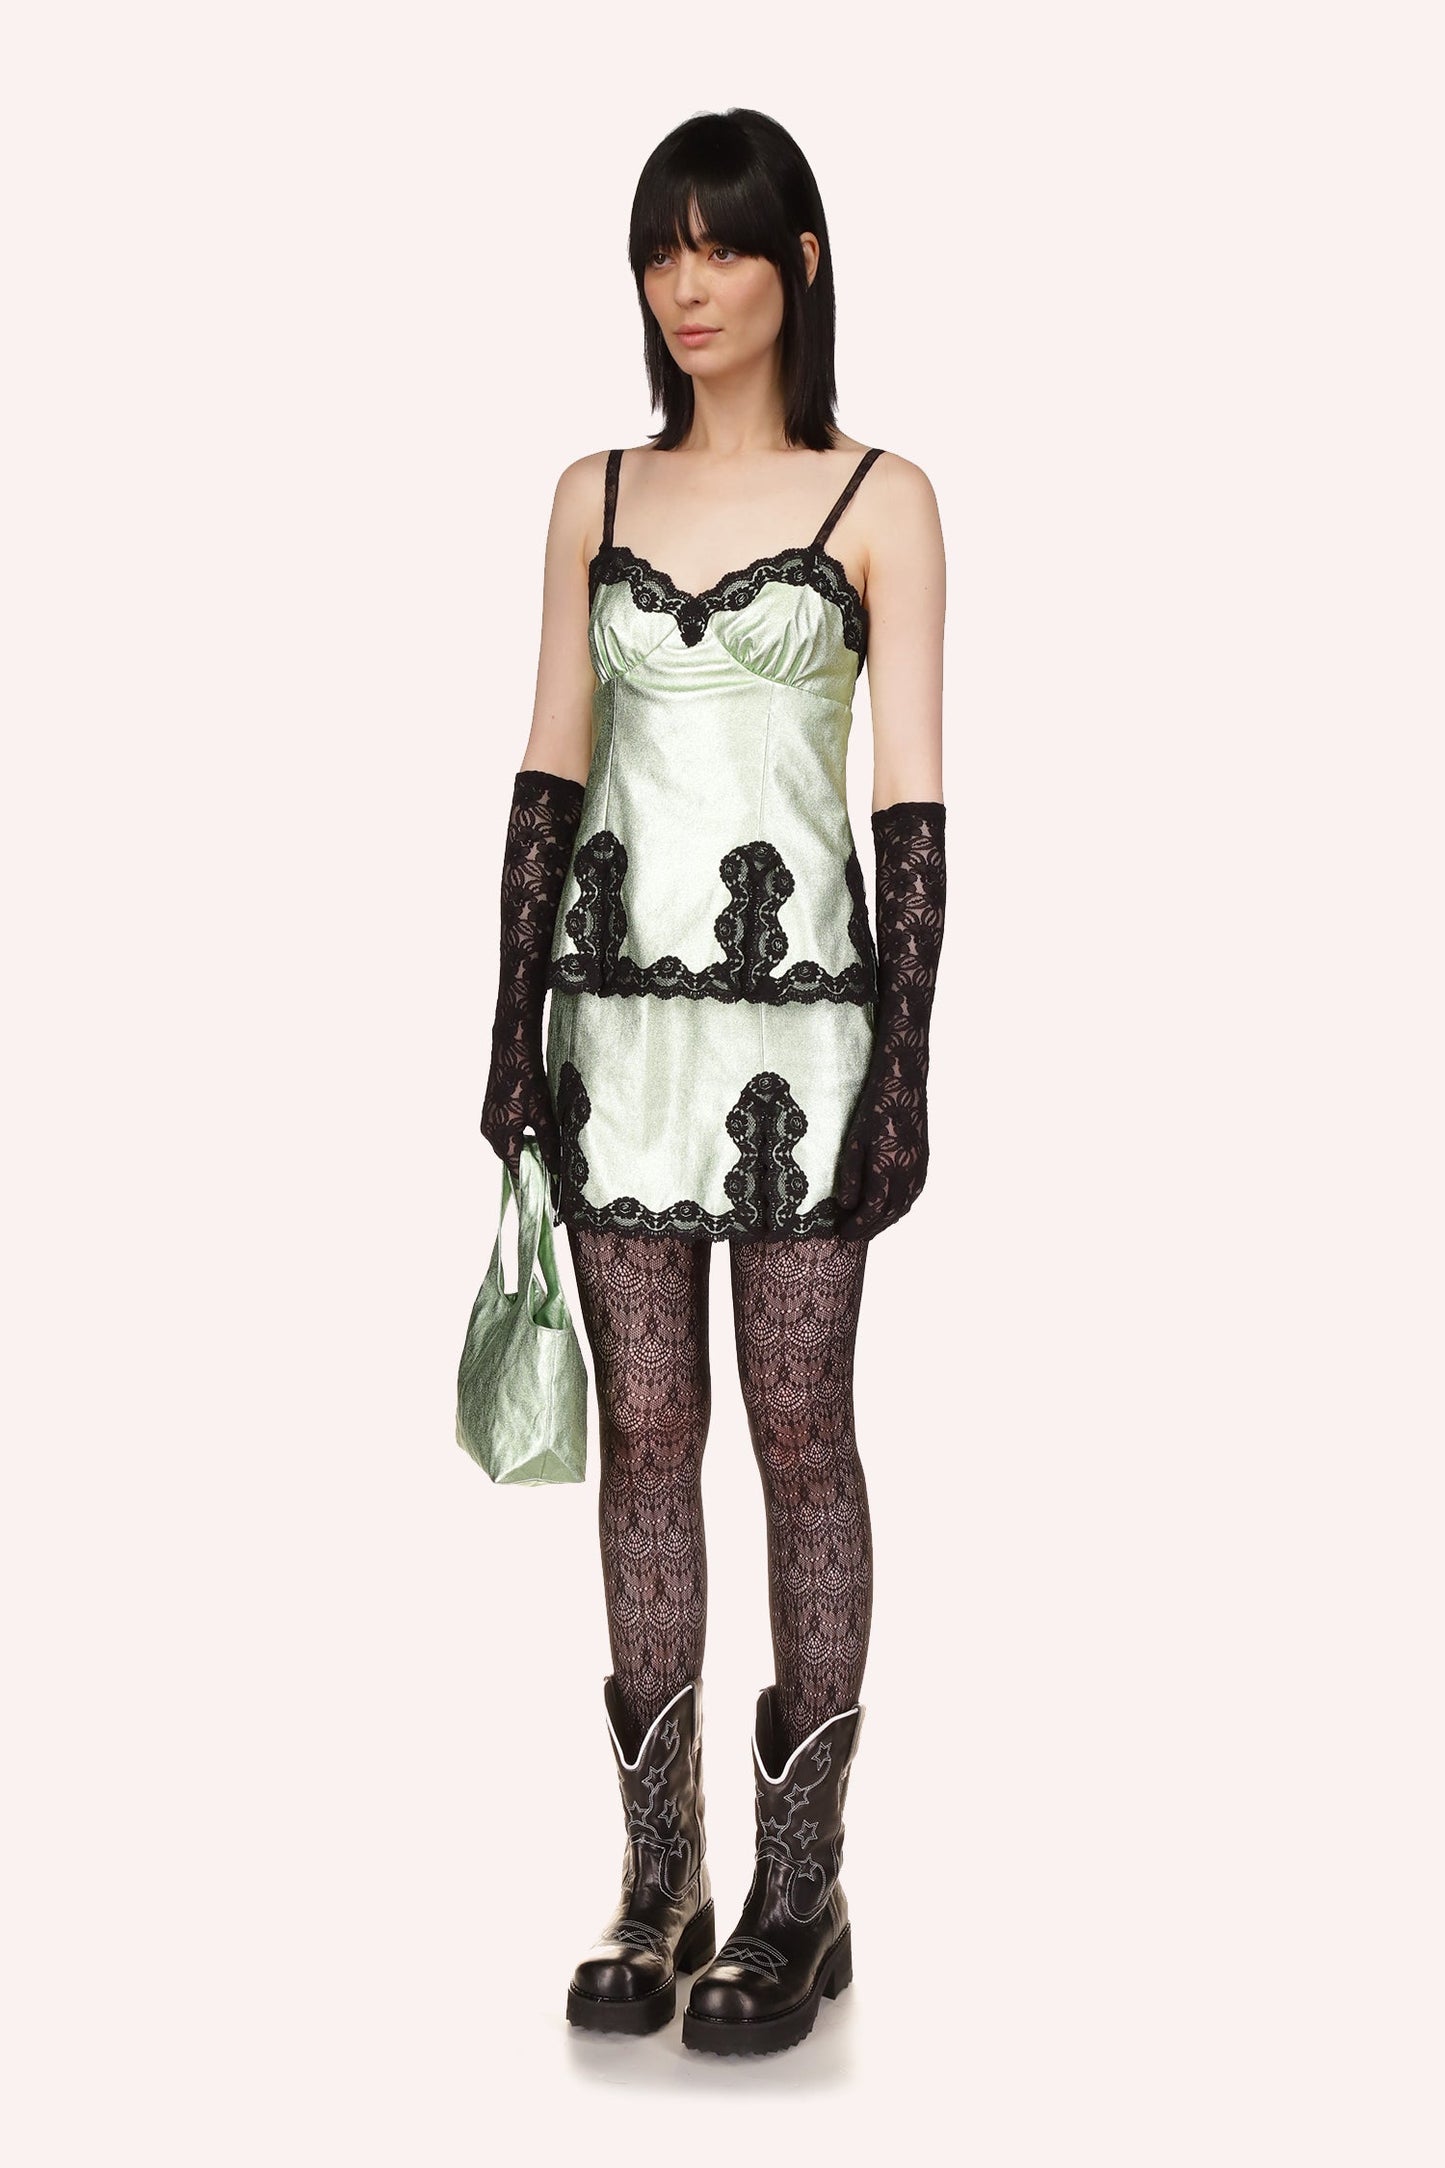 Anna Sui's Camisole Top Peppermint, sleeveless, black lace around the top and bottom